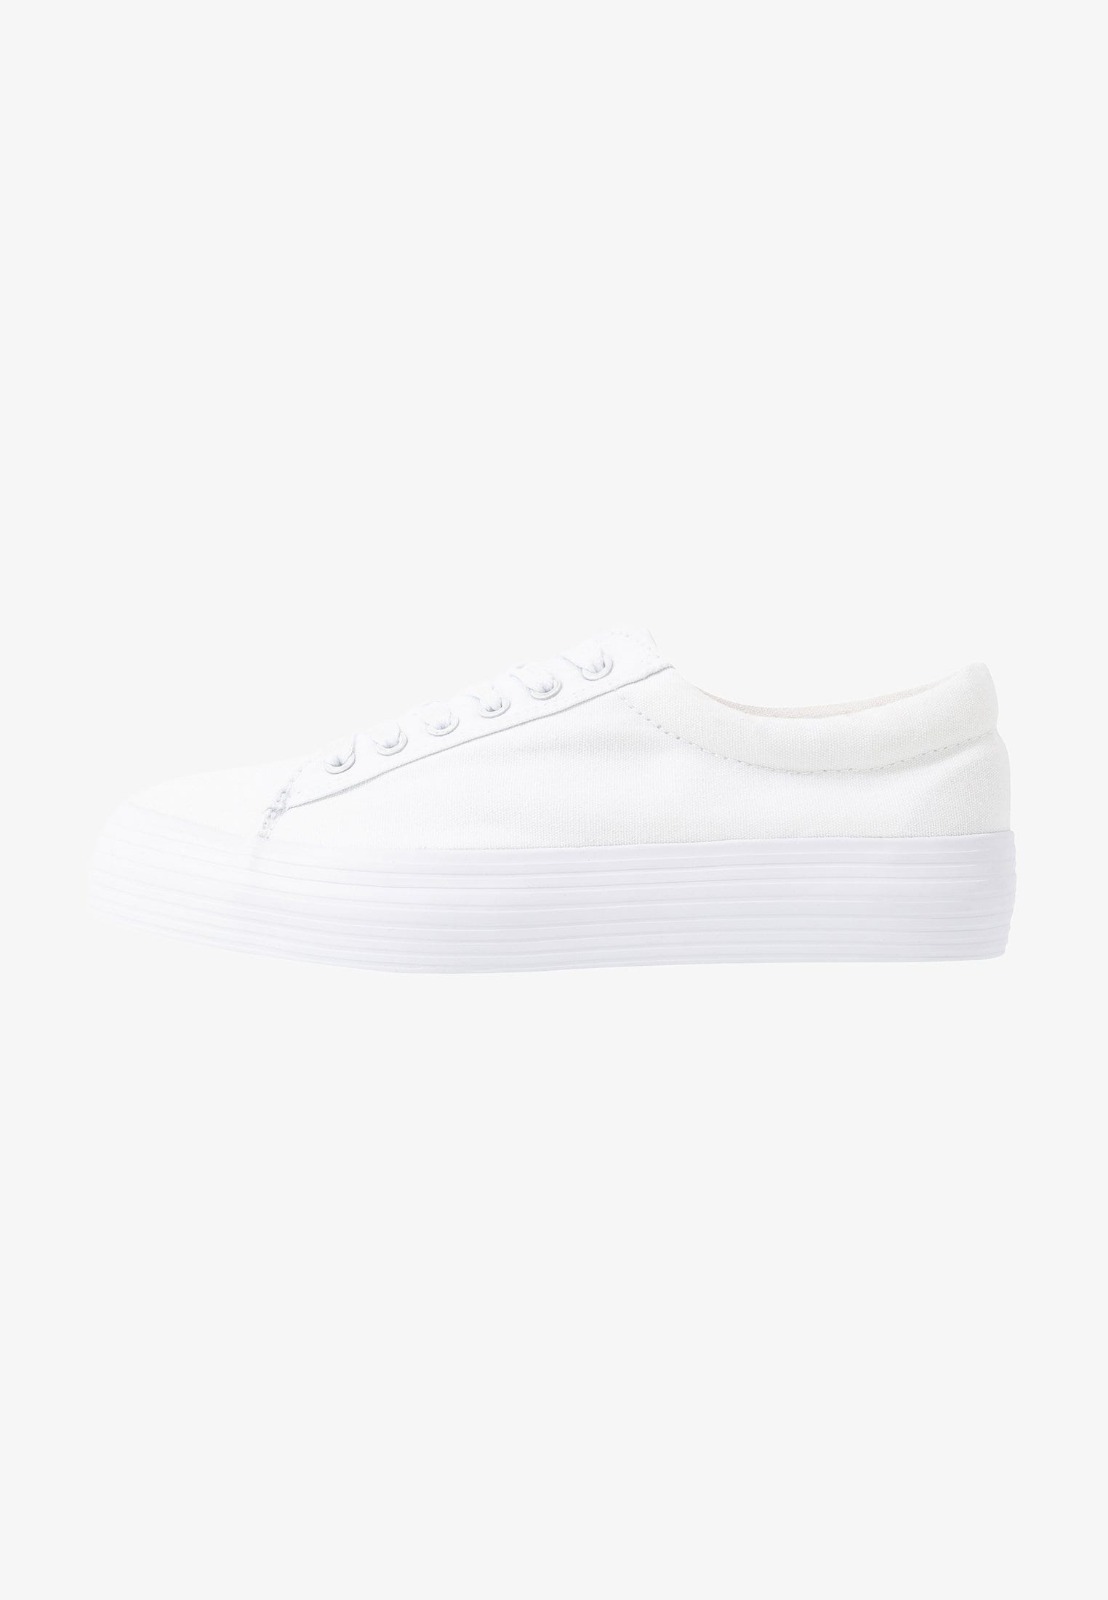 ladies white trainers size 6